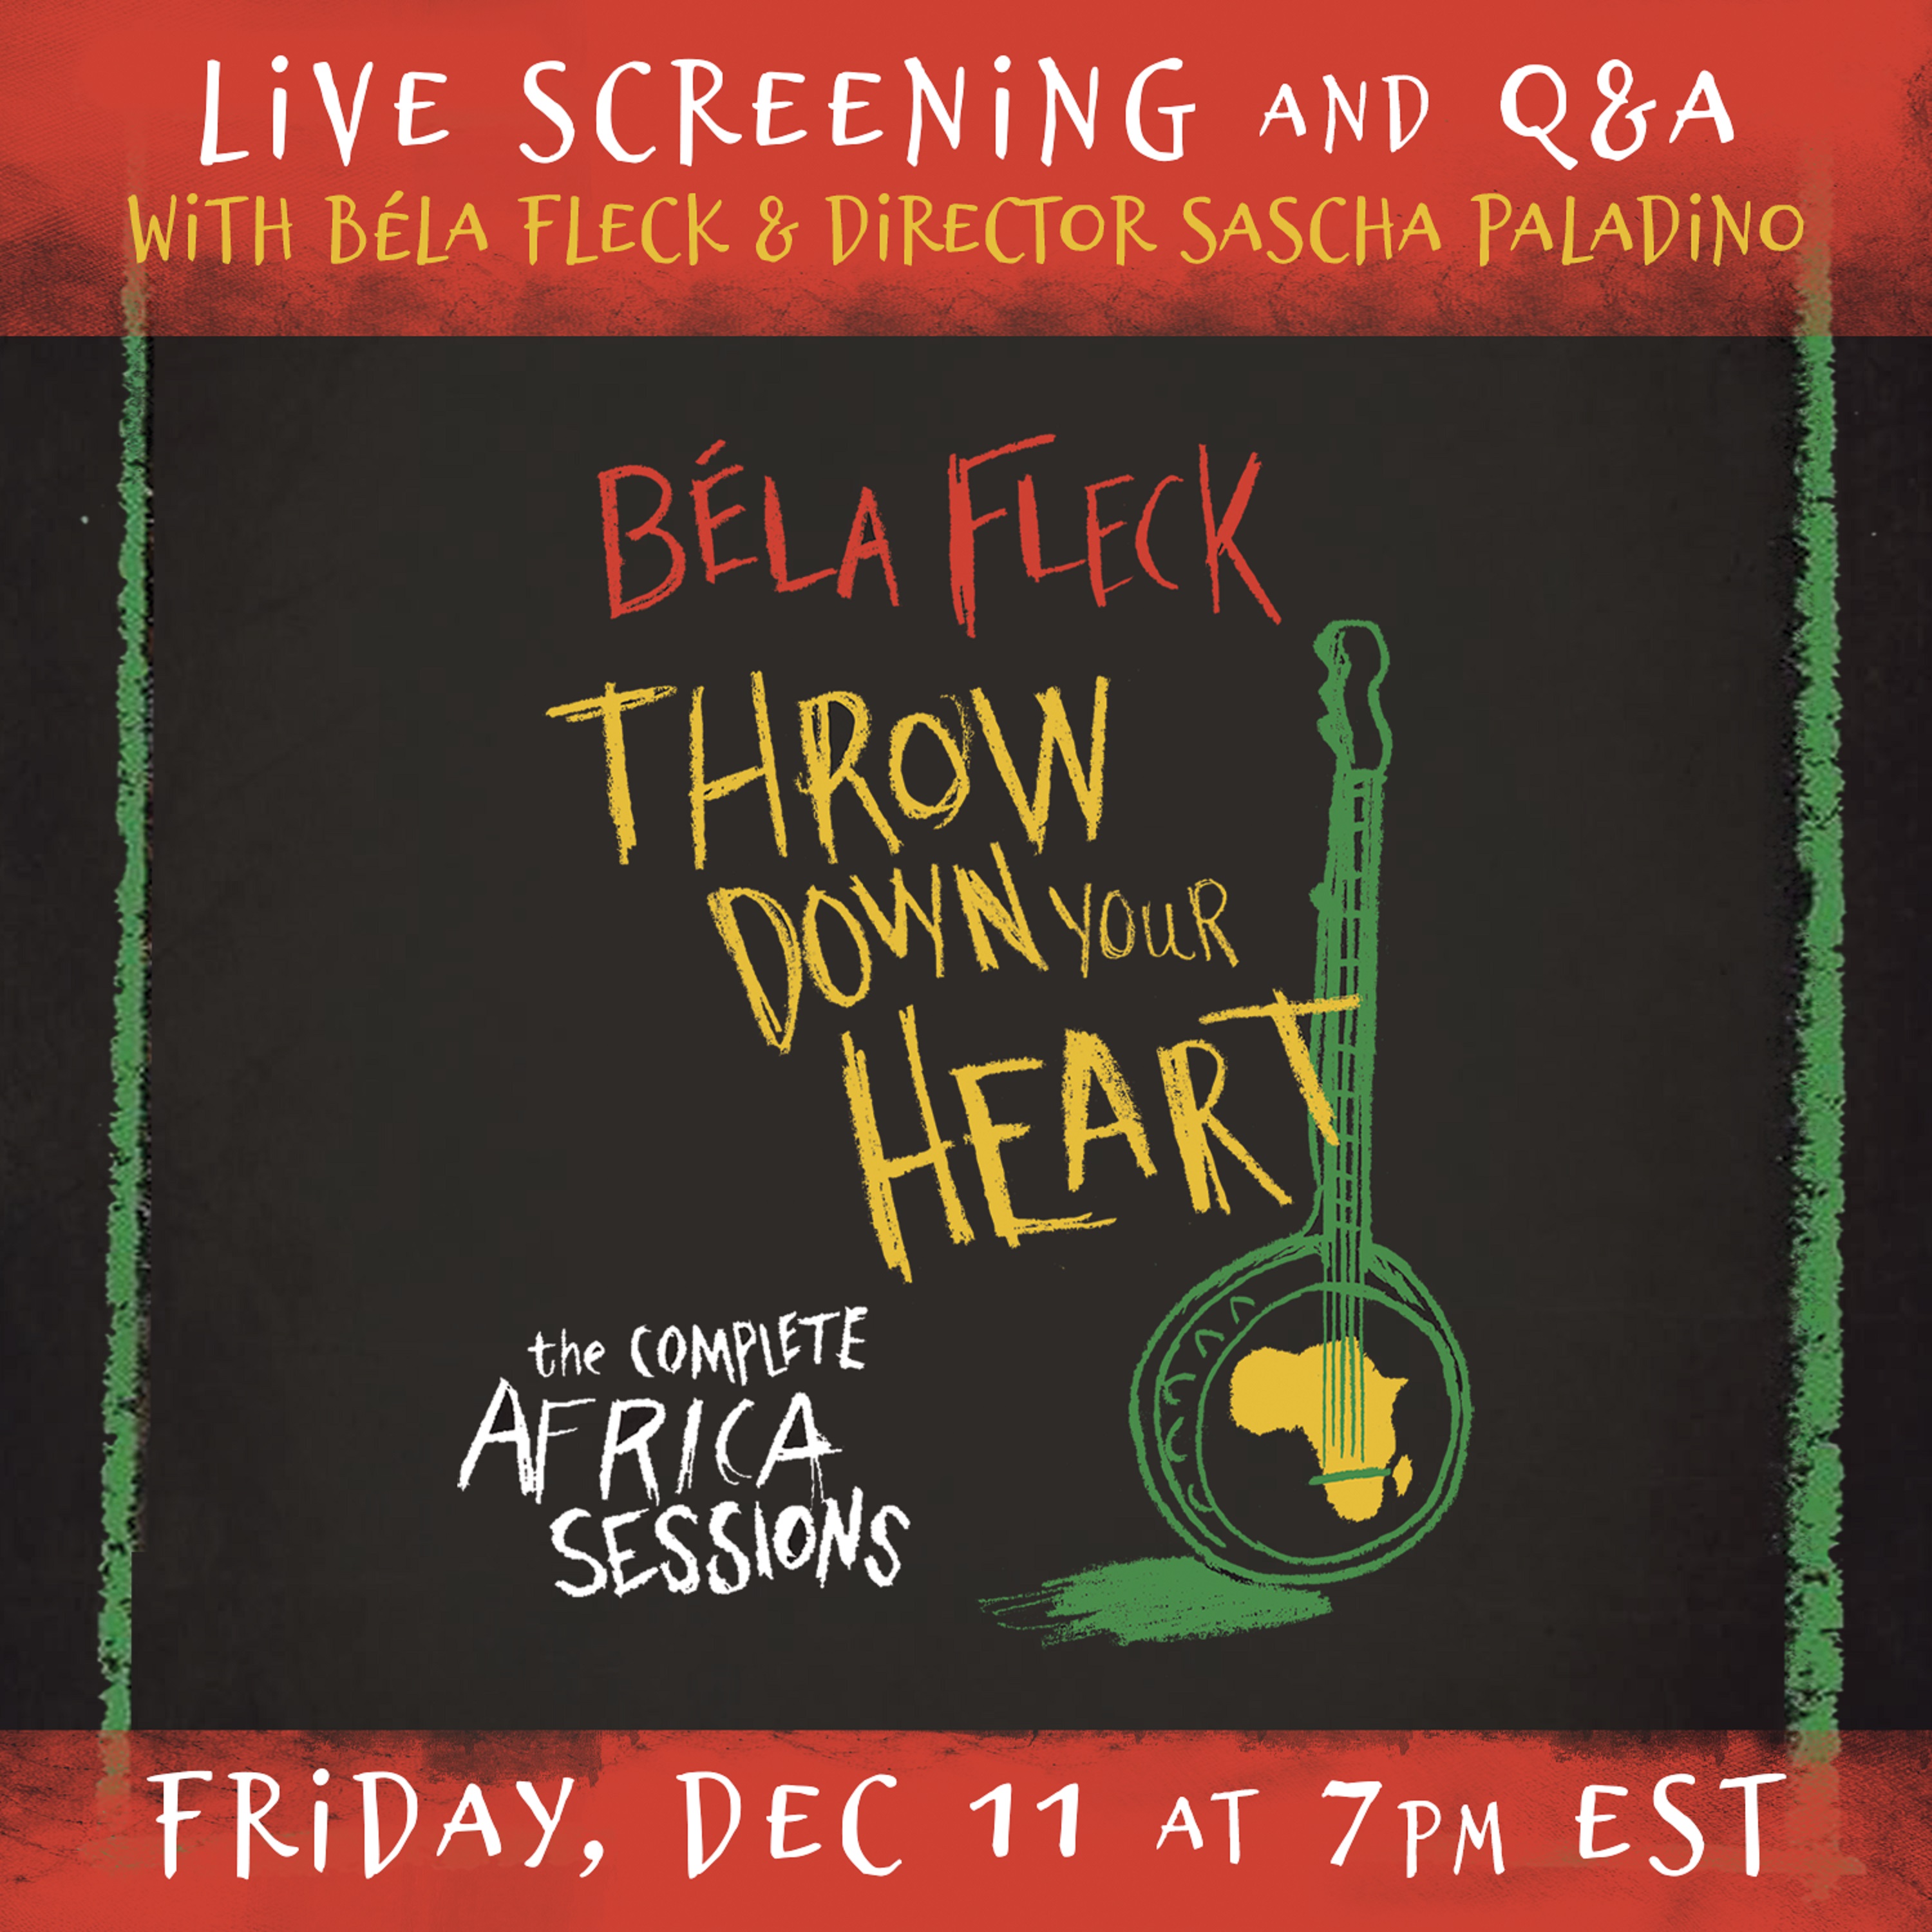 Bela Fleck's Throw Down Your Heart Live Screening and Q&A